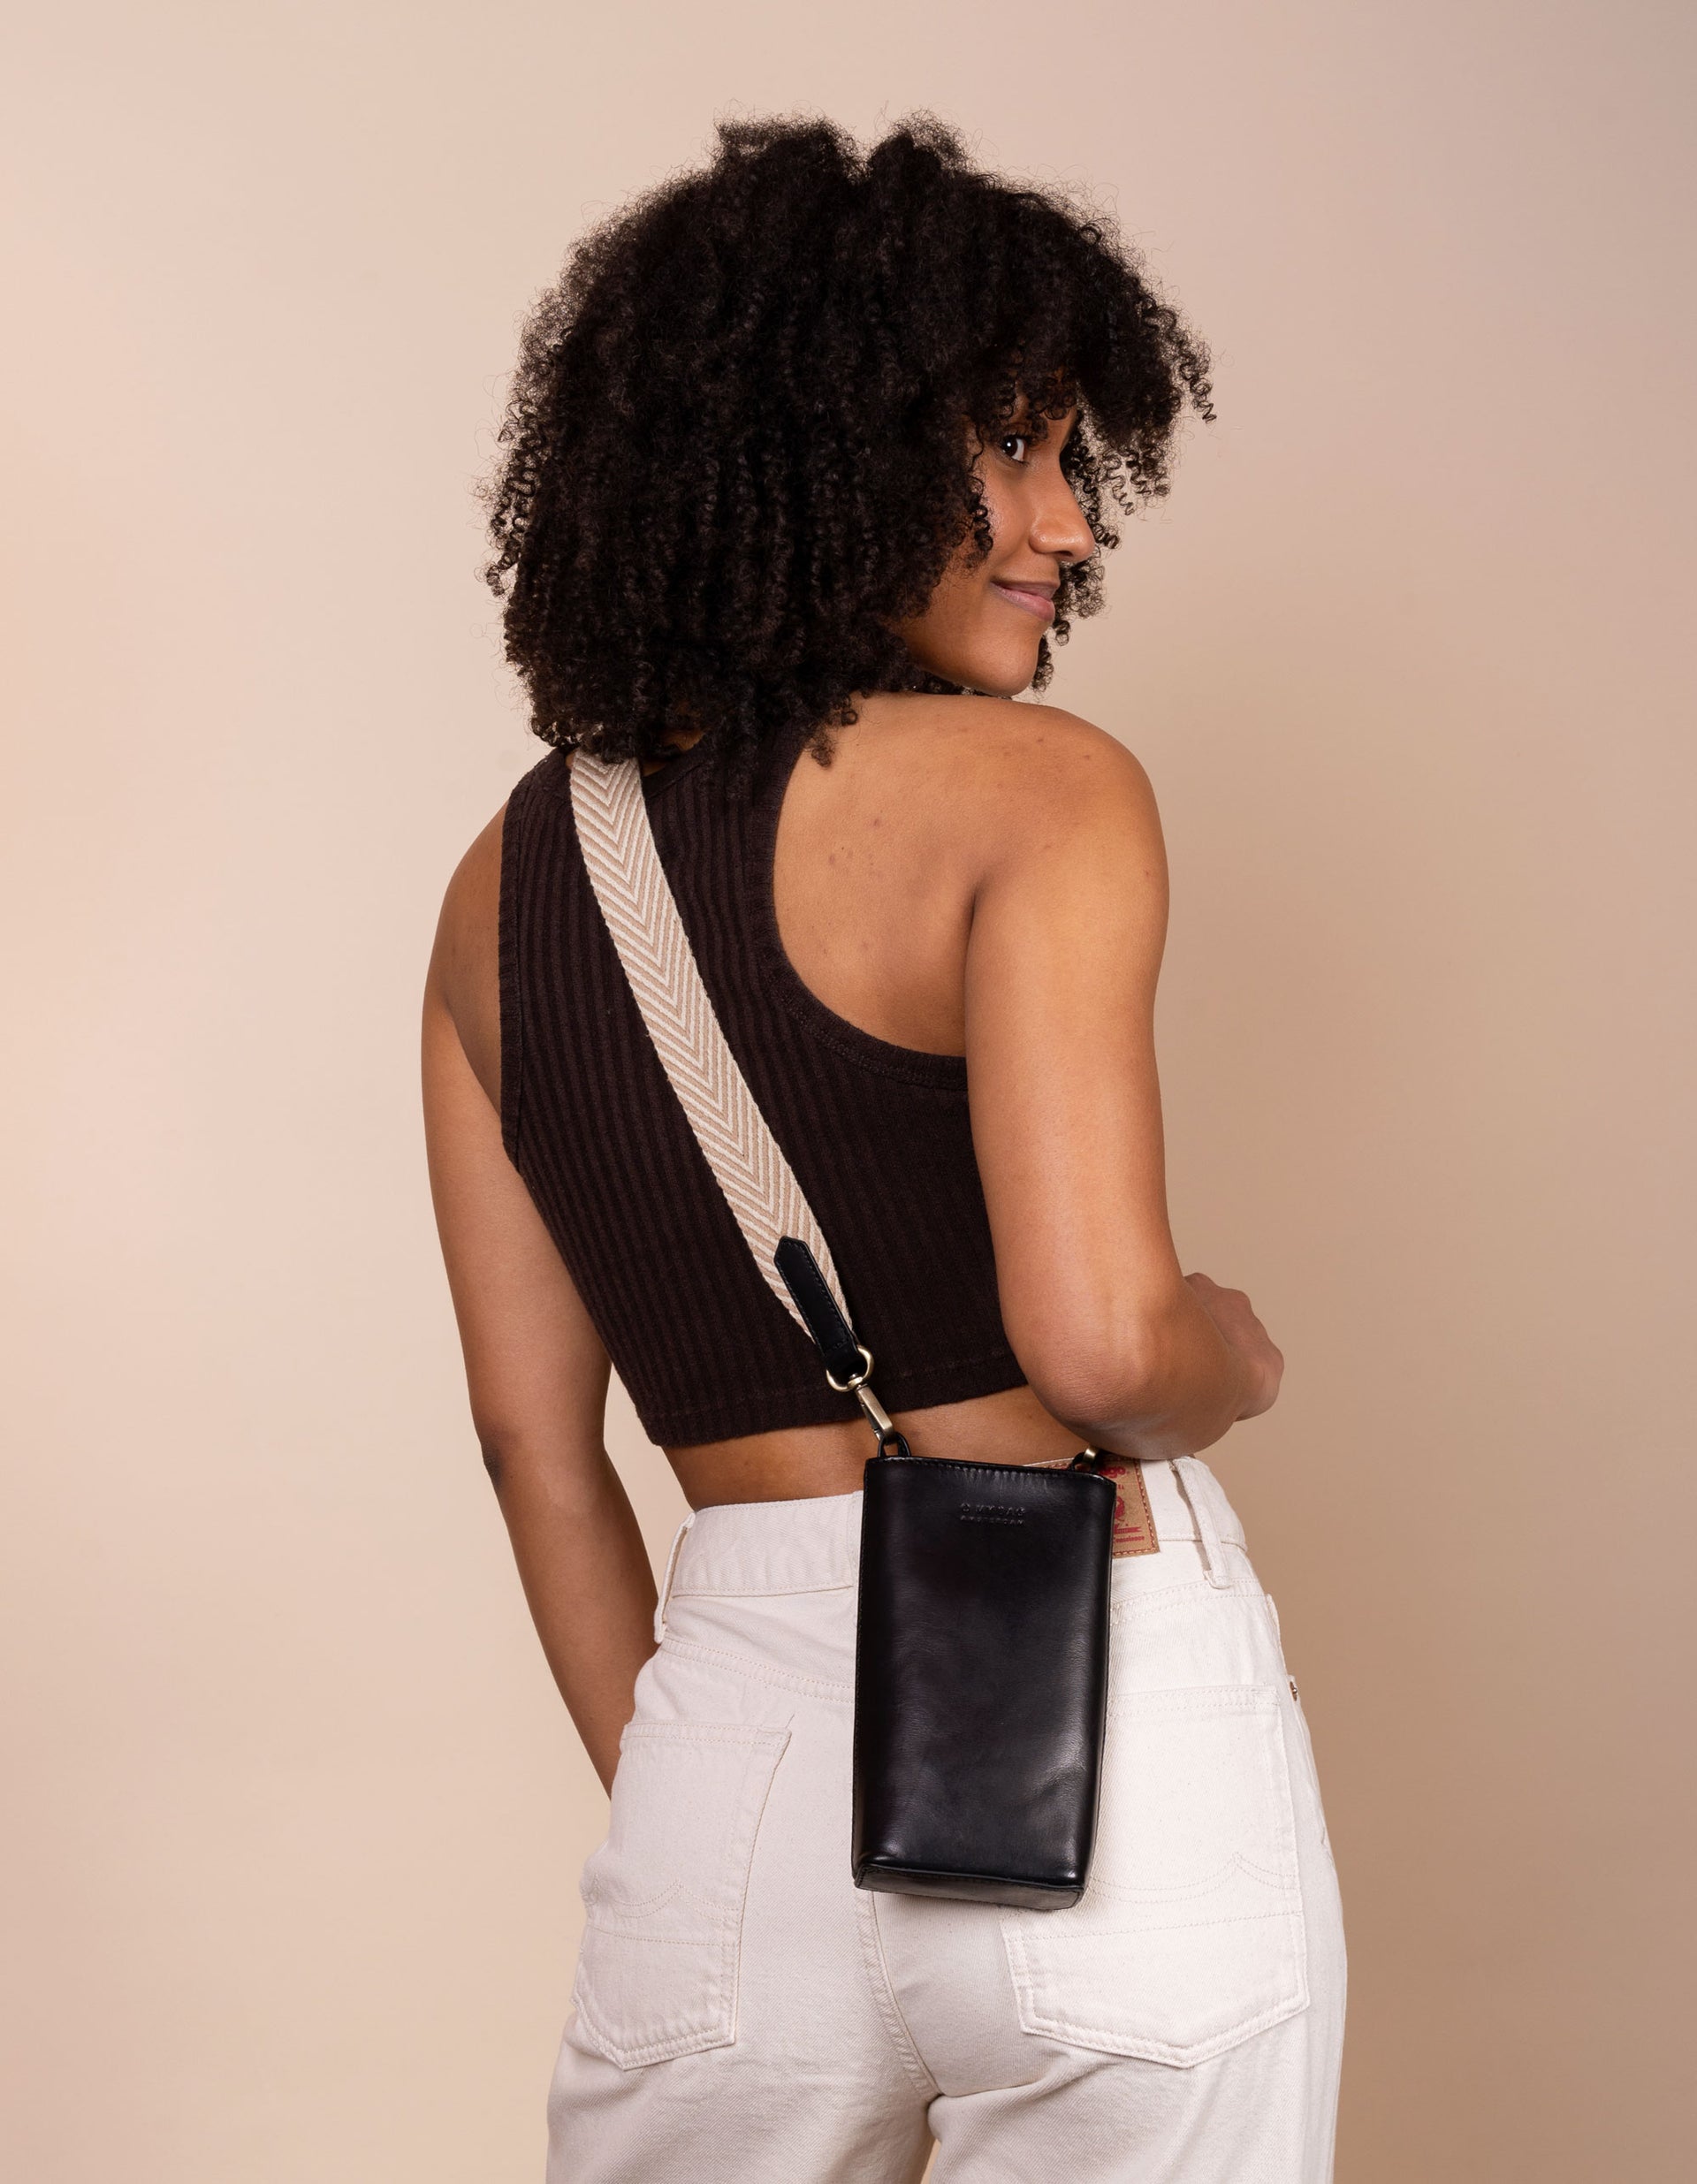 Charlie phone bag - black classic leather - female model product image with the webbing strap - back view